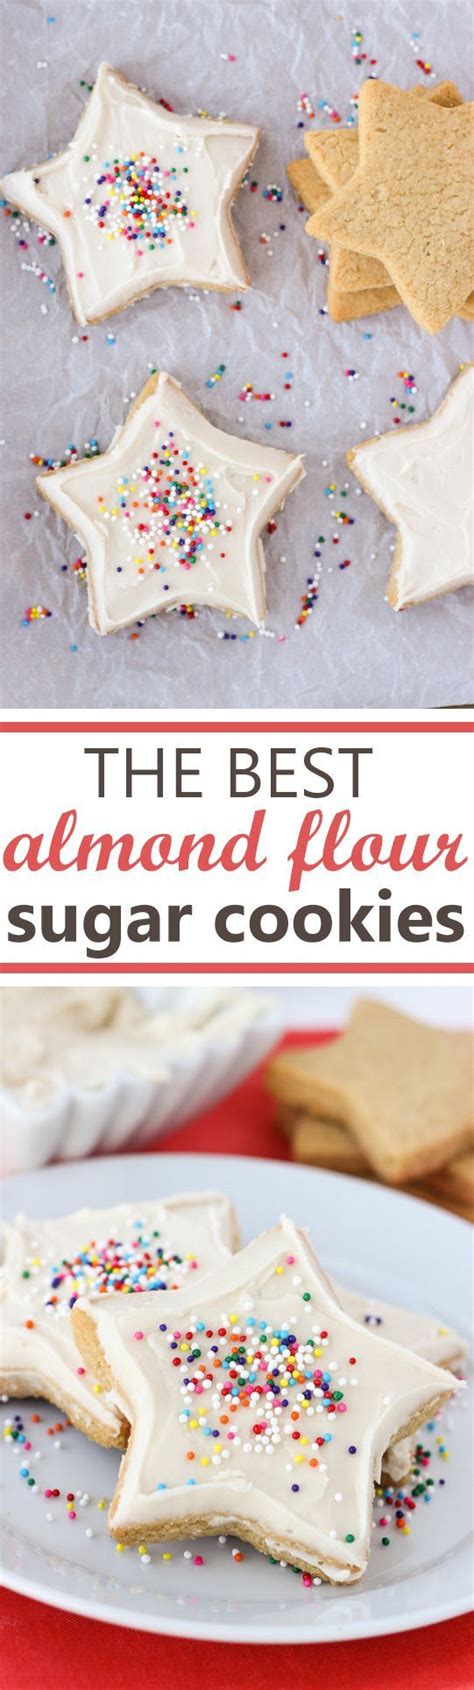 It takes less than half an hour to make these delicious gluten free, dairy free cookies! The Best Almond Flour Sugar Cookies (Gluten-Free, Grain-Free) | Recipe | Gluten free christmas ...